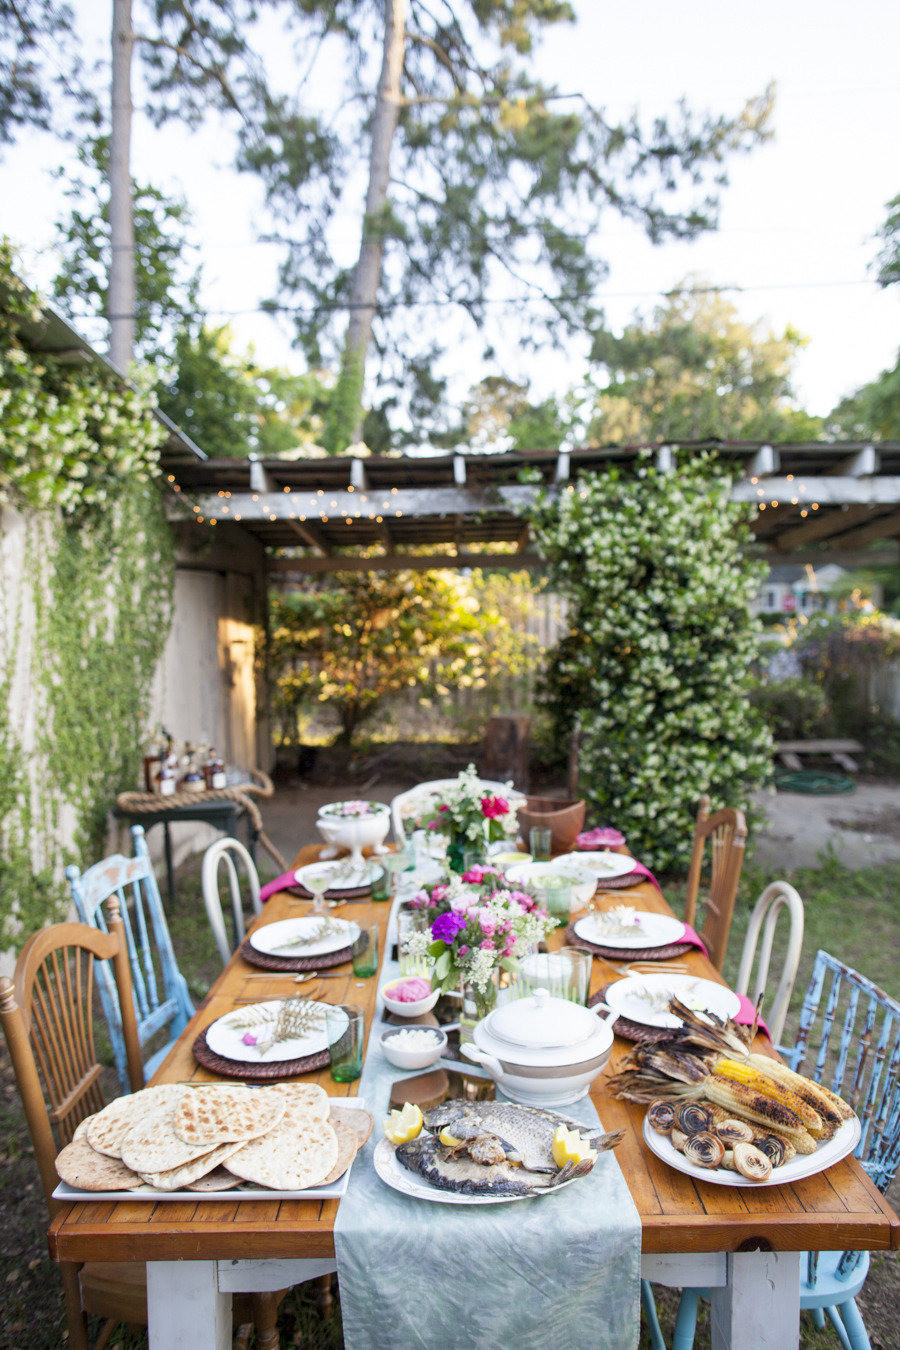 Backyard Party Decorating Ideas
 50 Outdoor Party Ideas You Should Try Out This Summer